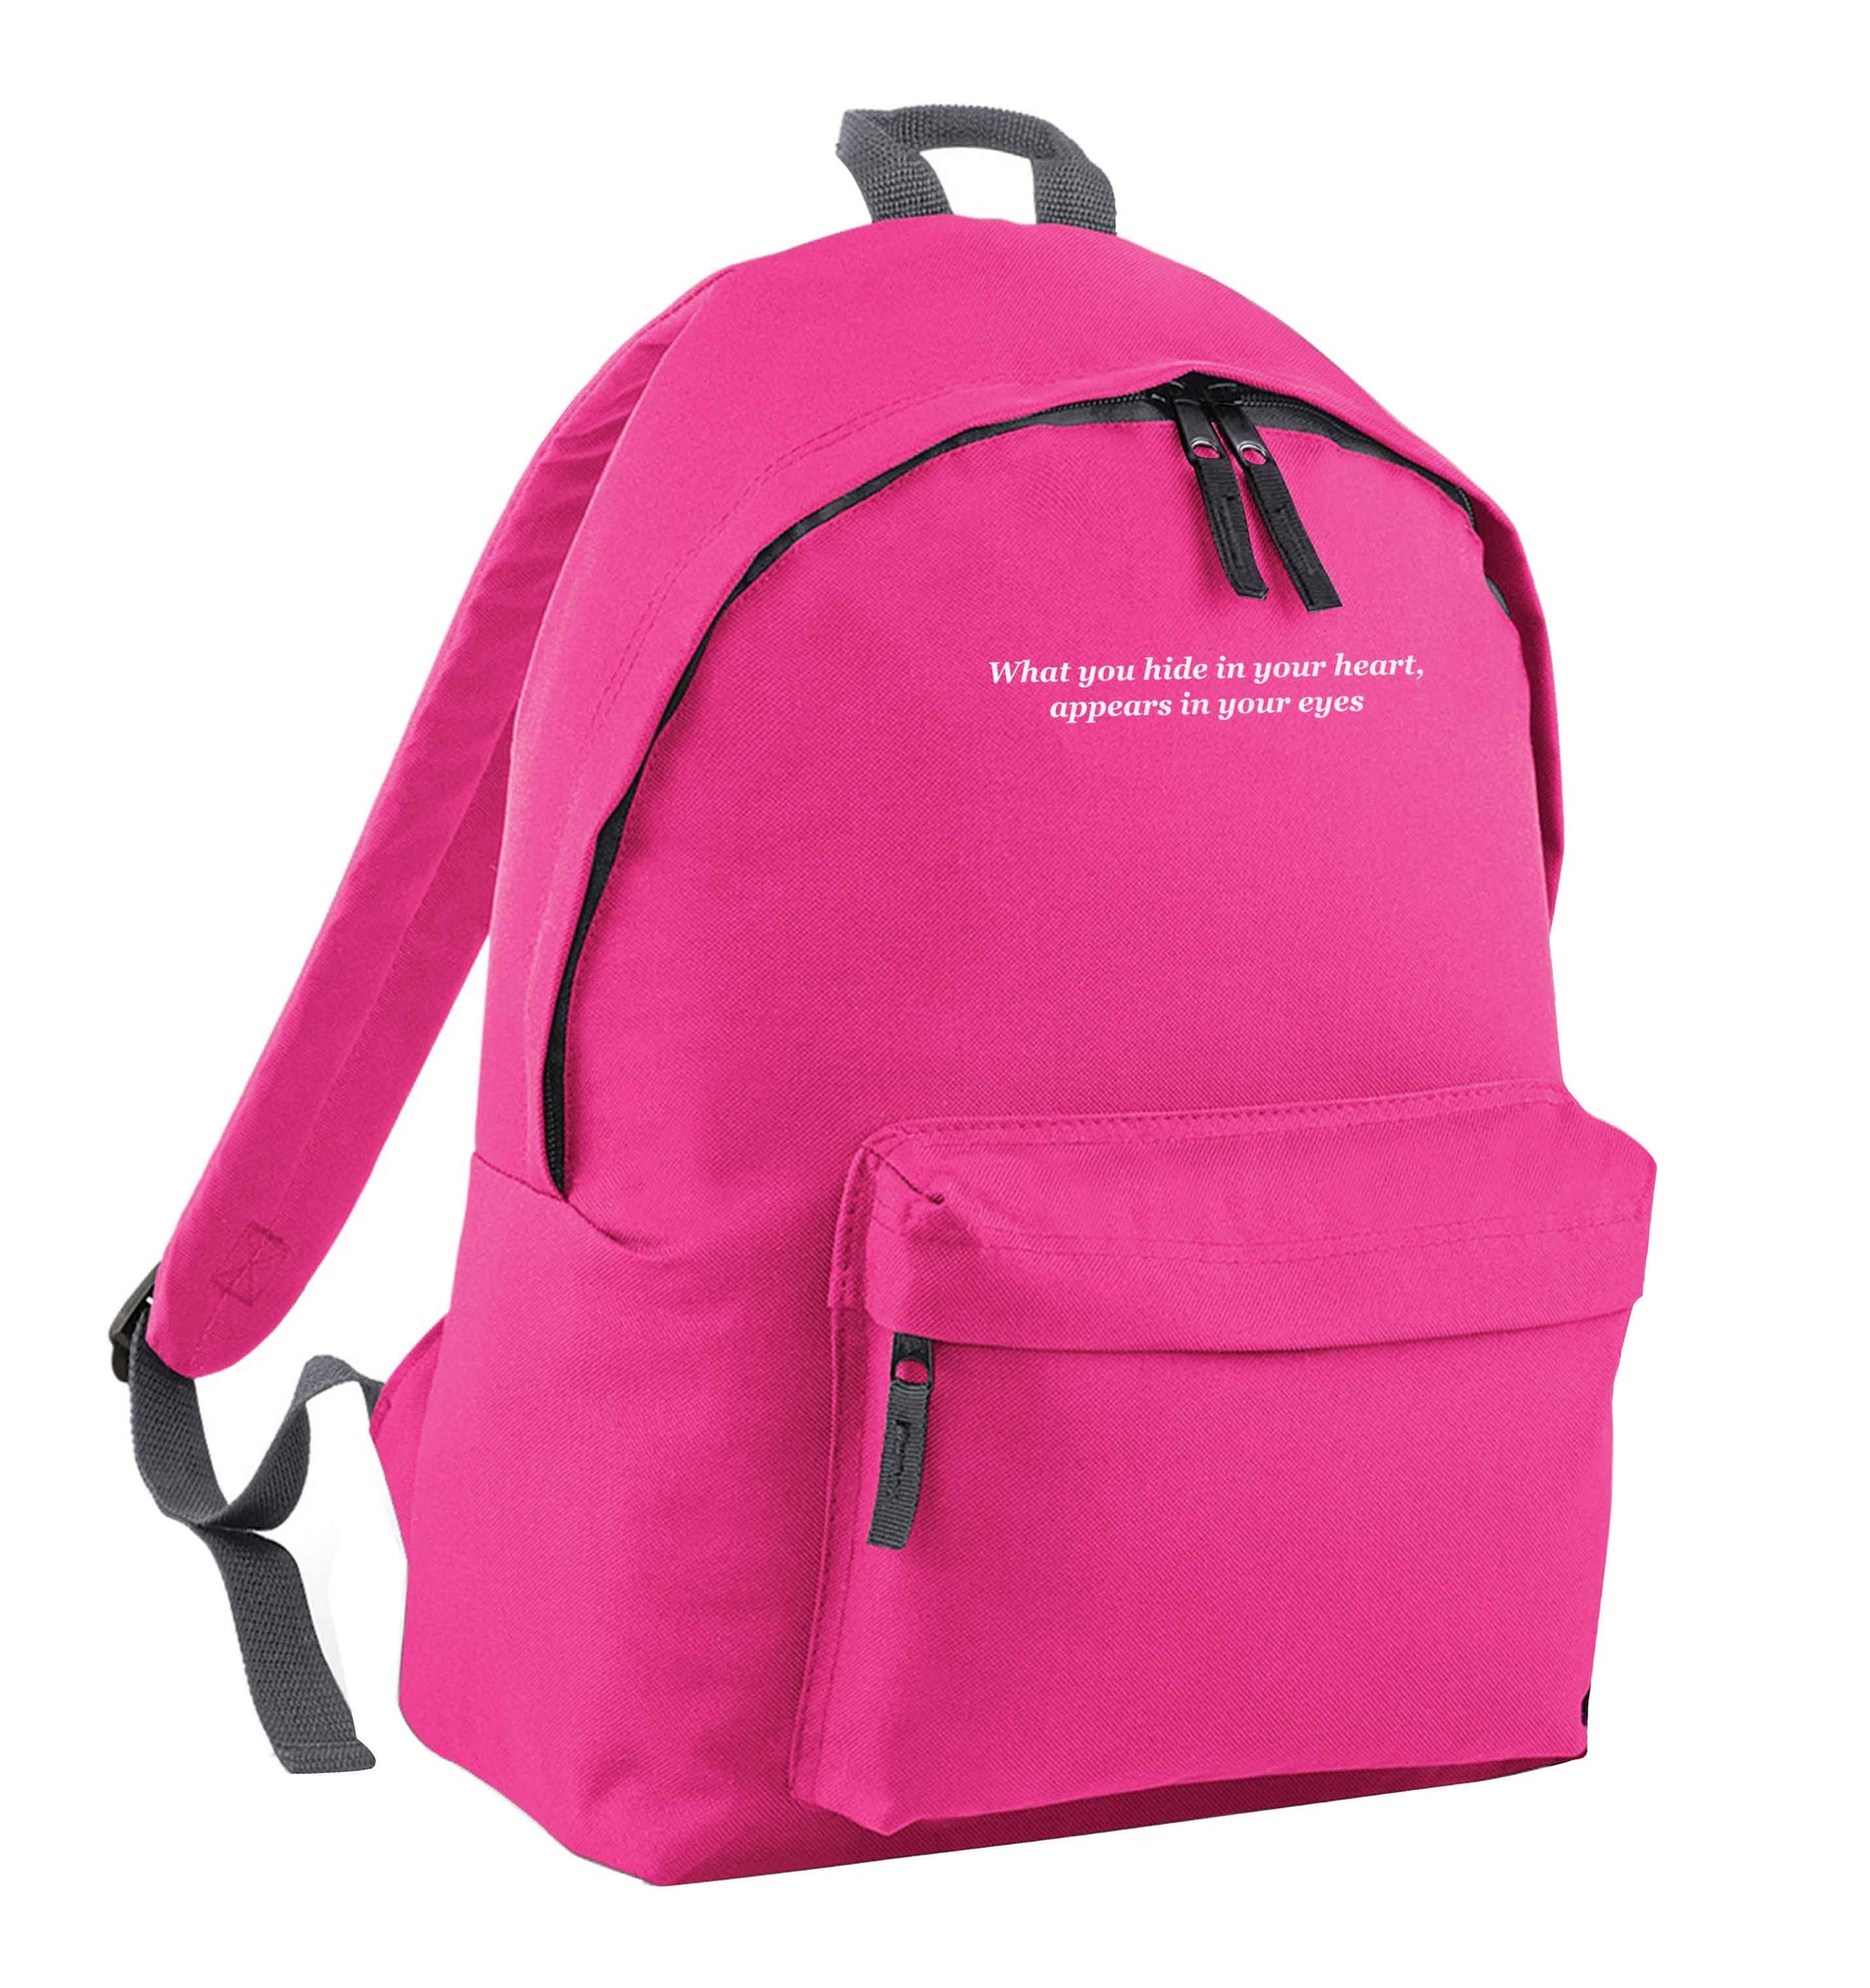 What you hide in your heart, appears in your eyes pink adults backpack